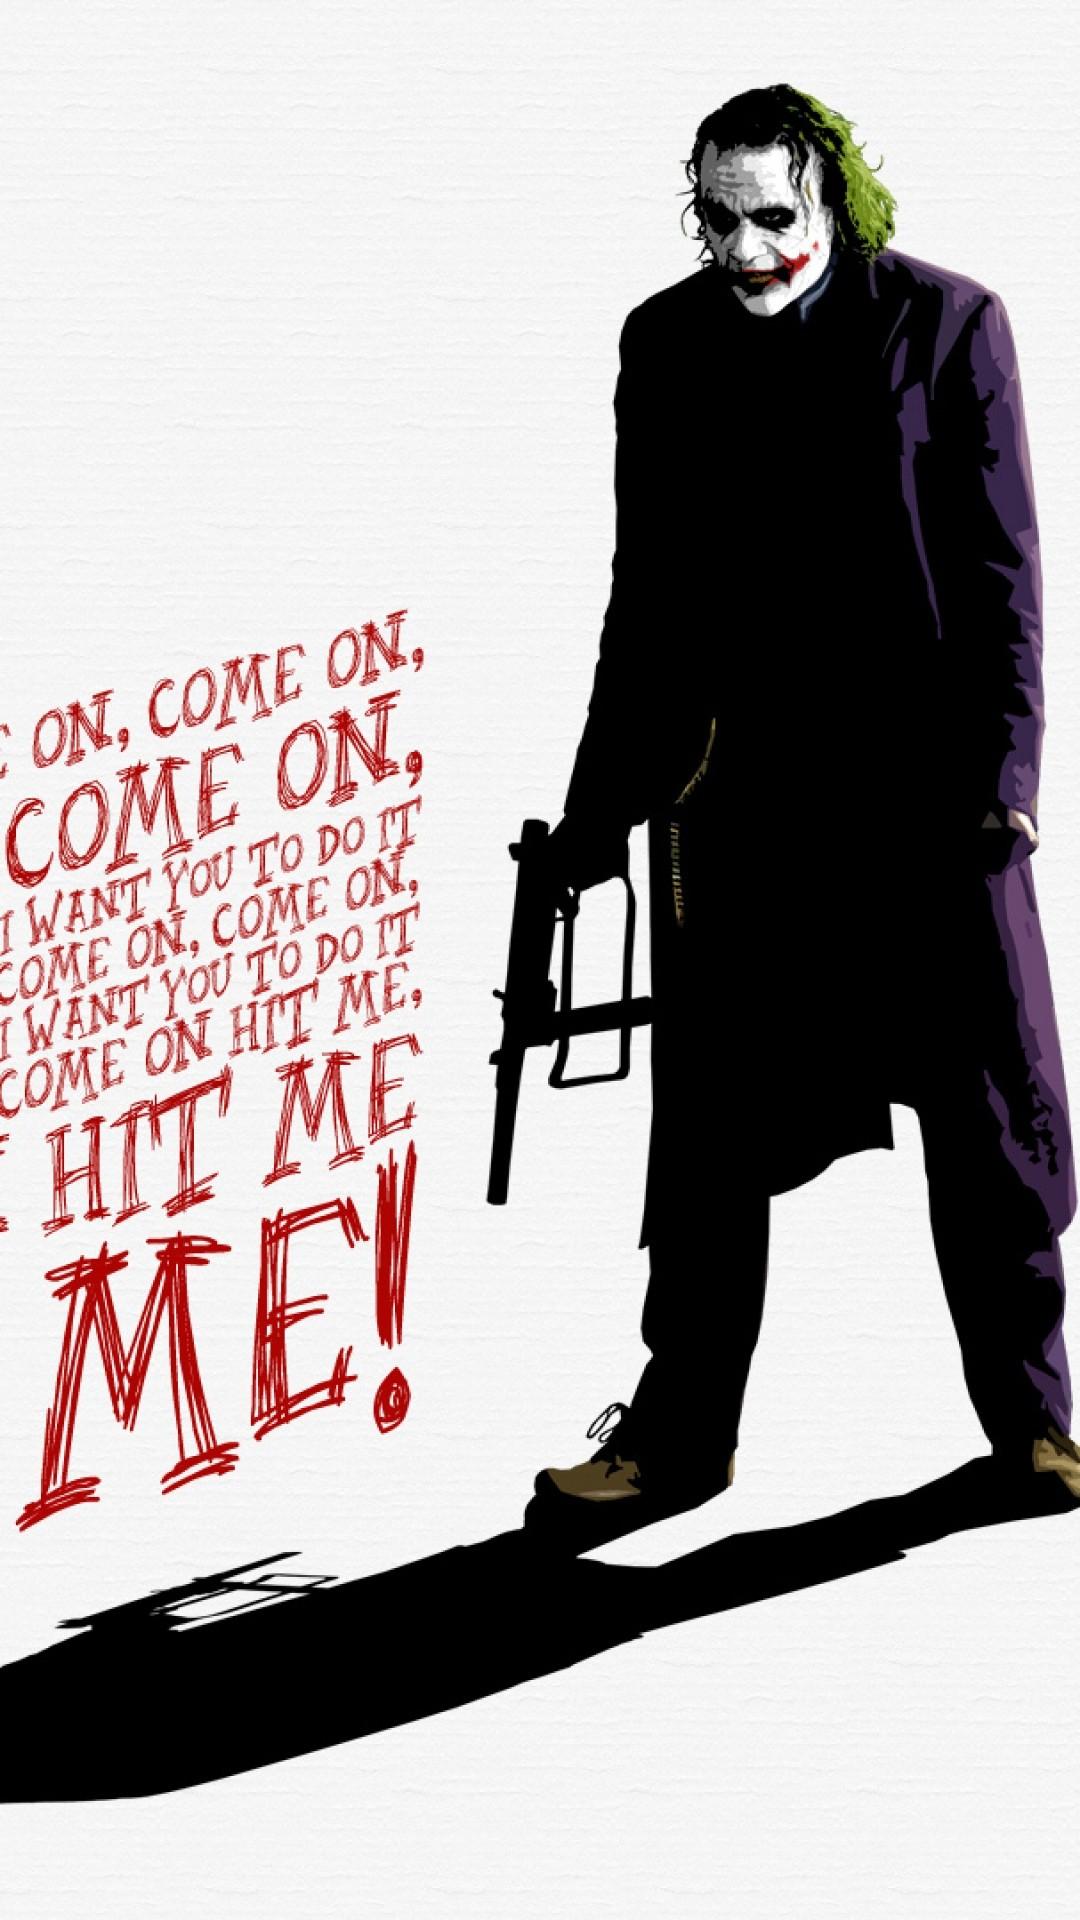 Joker Quotes Wallpaper HD For Android. Best Funny Image